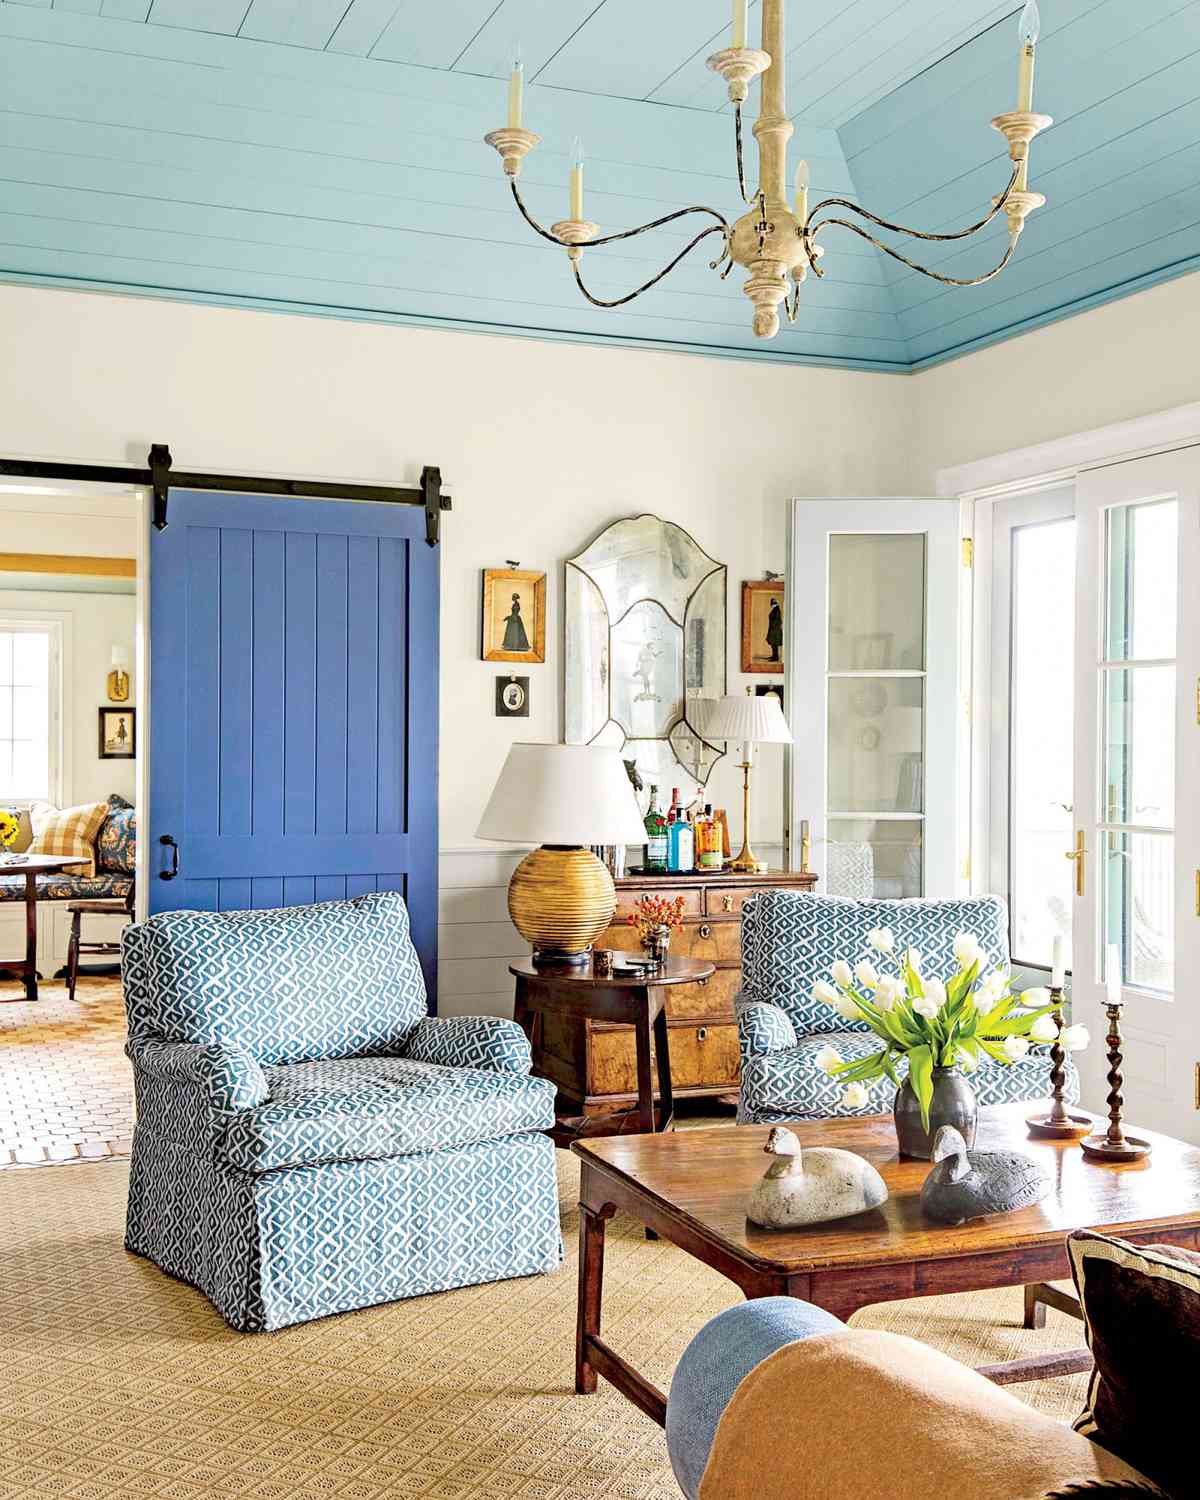 Southern Style Decorating Living Room: Bringing The Charm Of The South Into Your Home